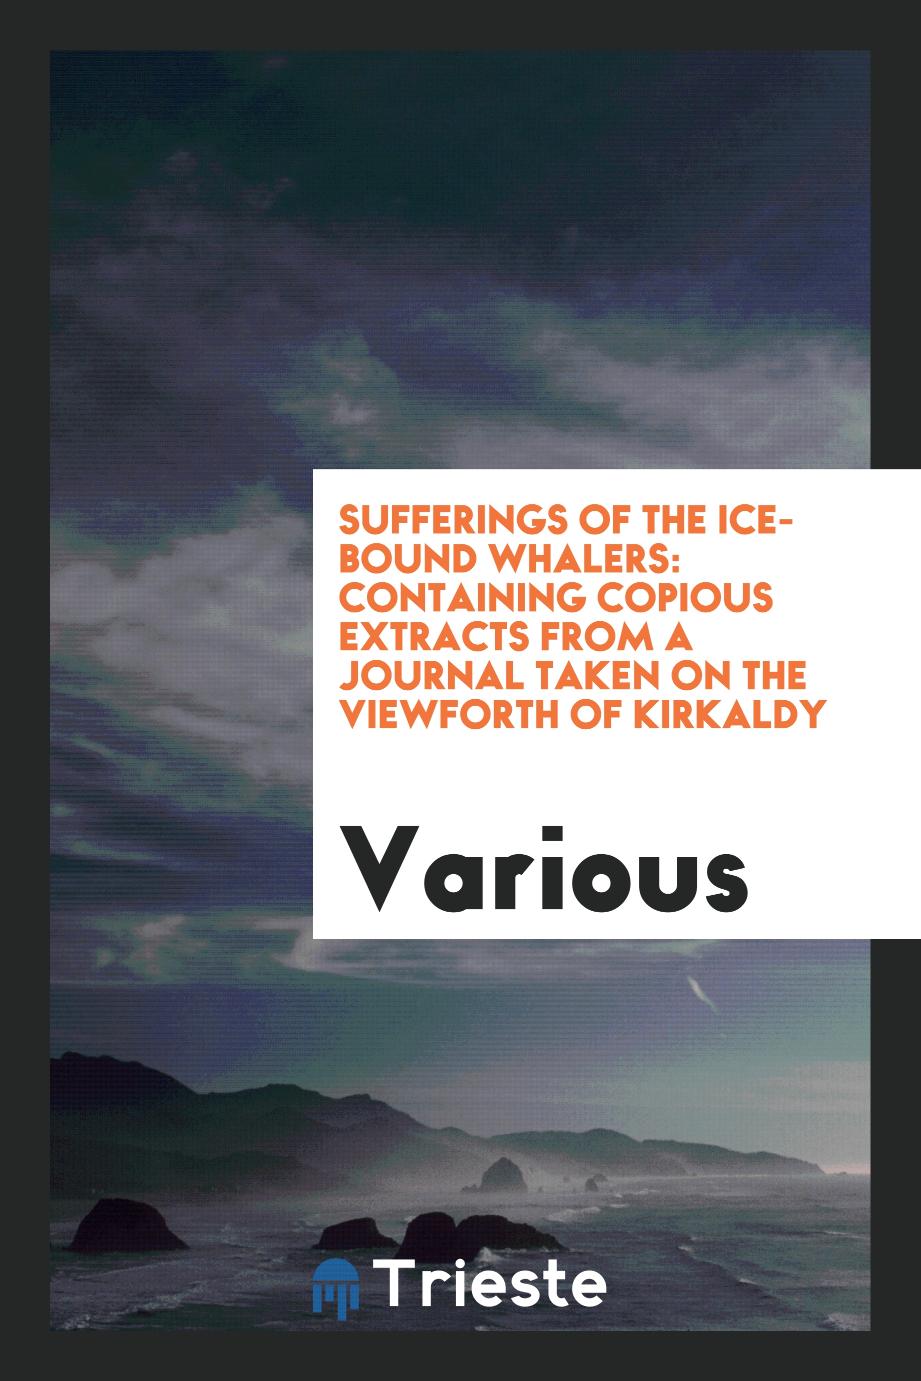 Sufferings of the Ice-bound Whalers: Containing Copious Extracts from a Journal Taken on the viewforth of kirkaldy